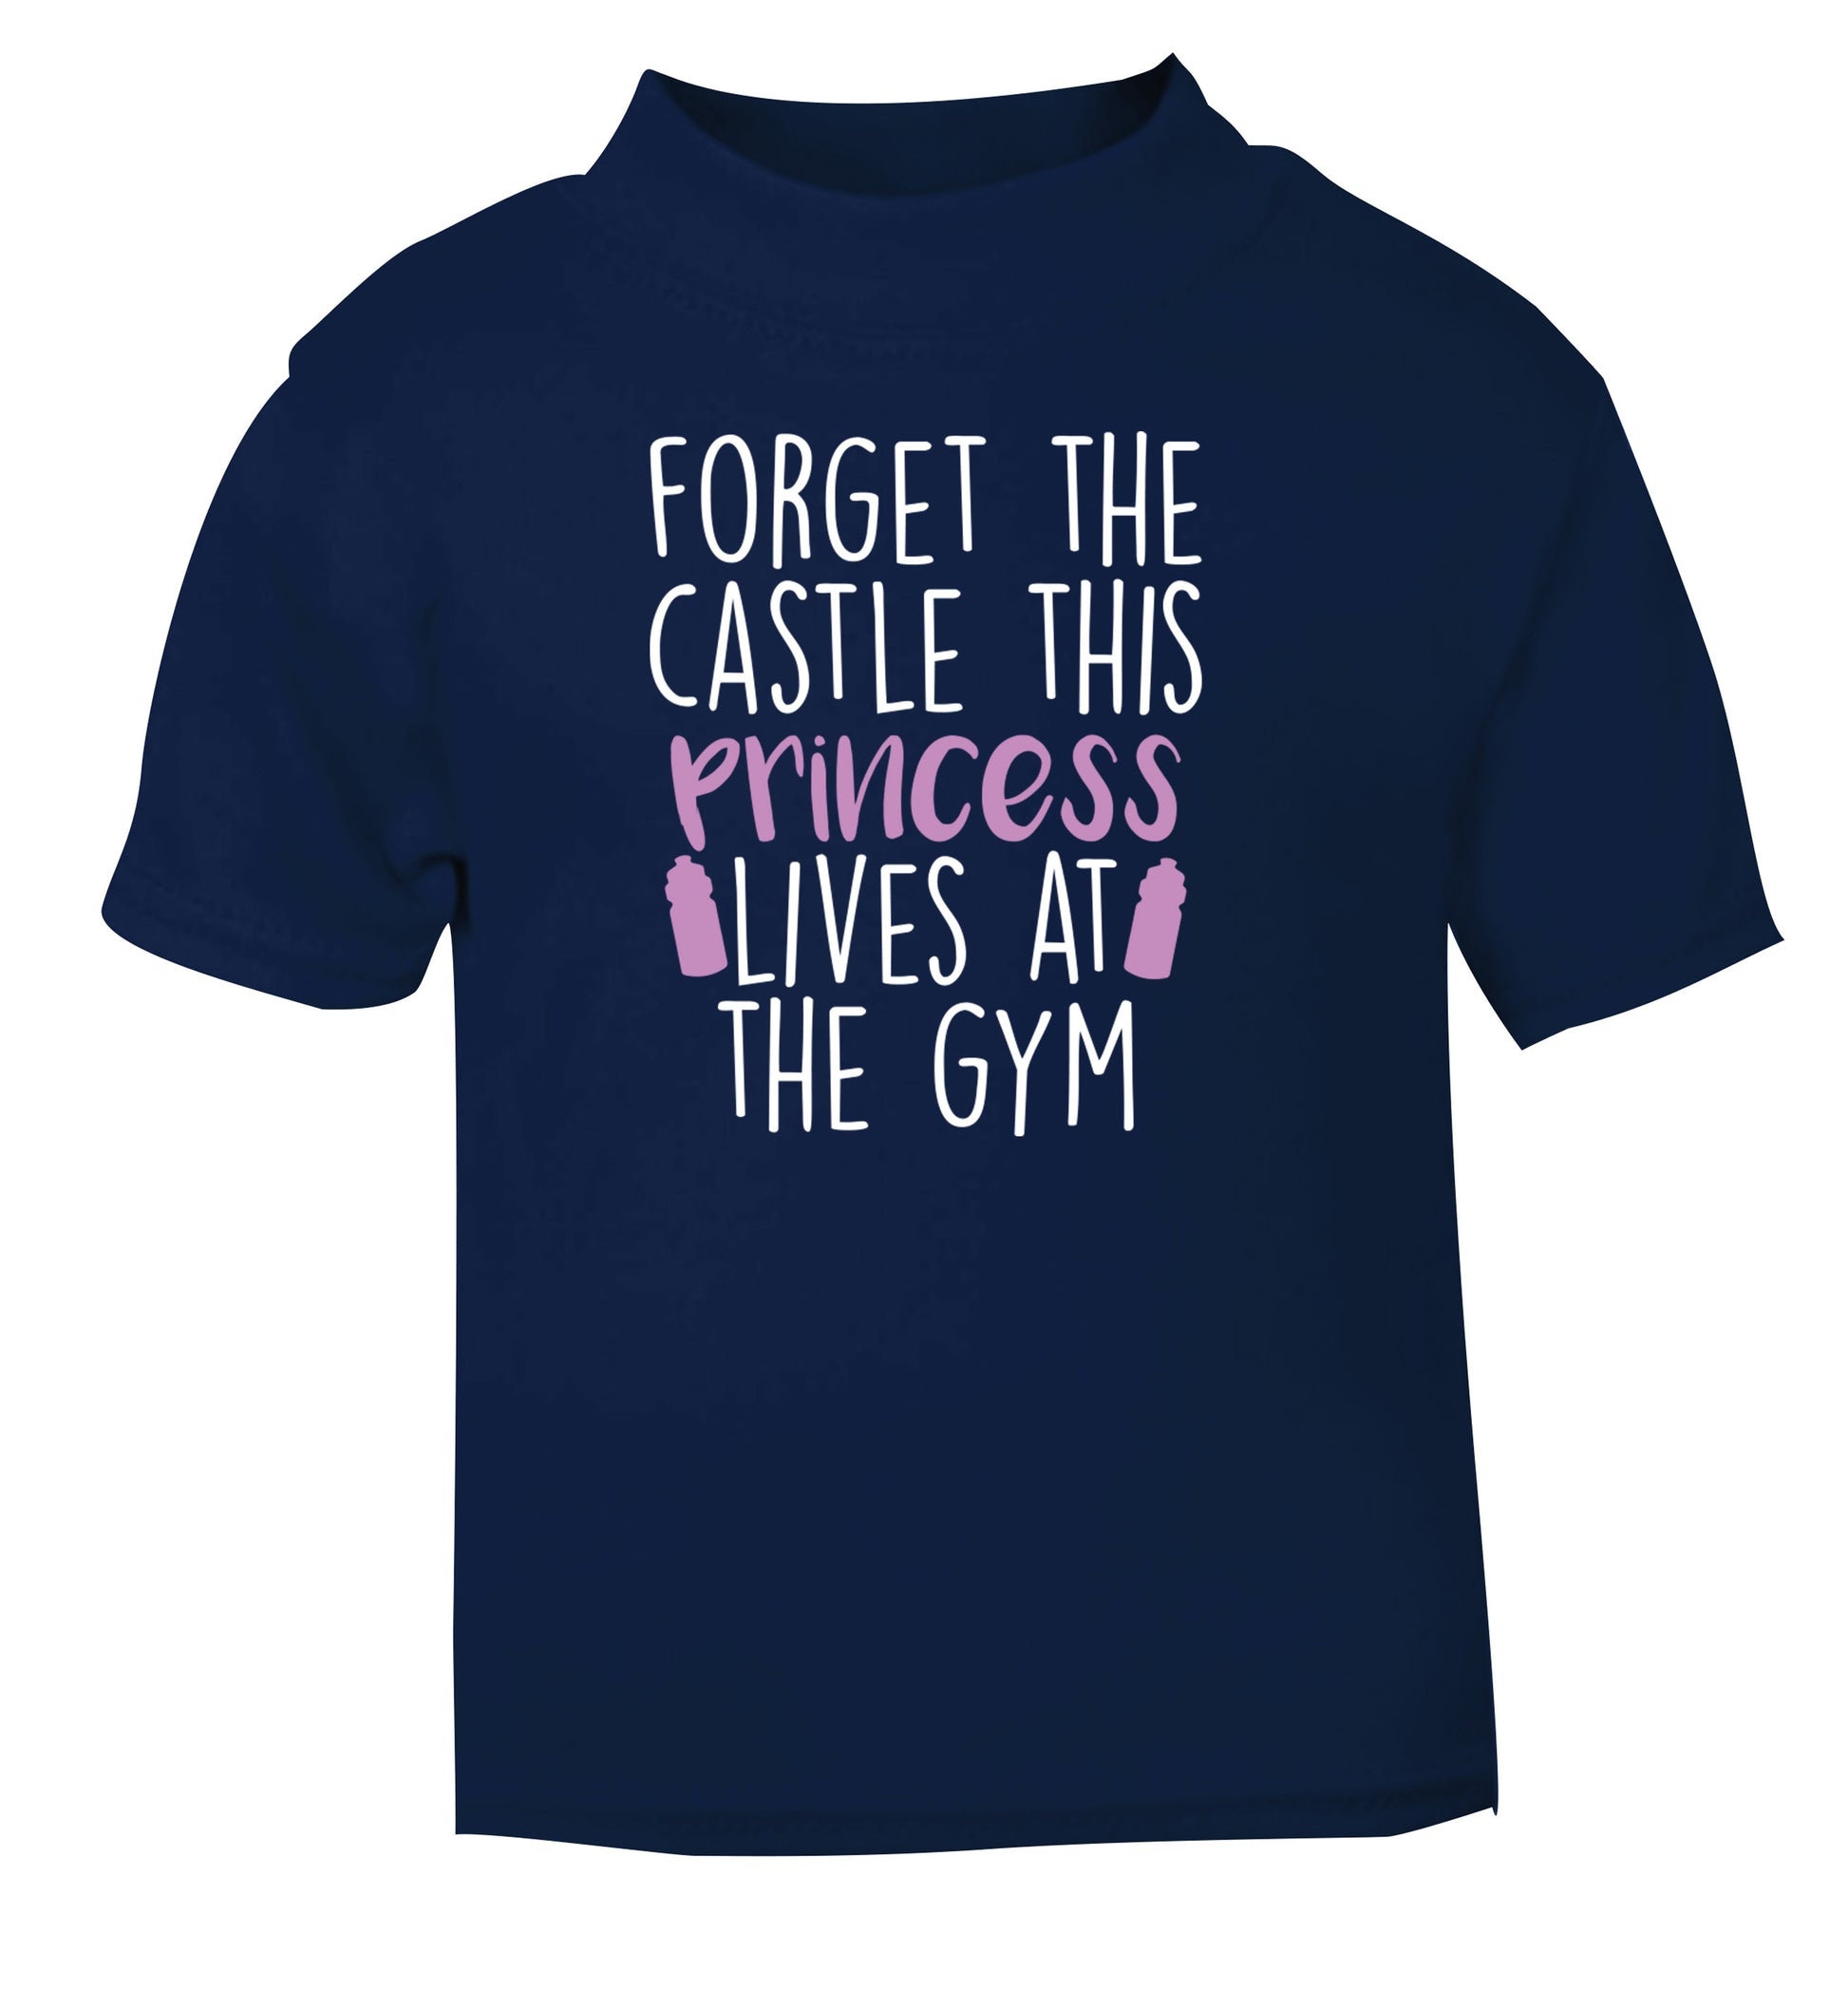 Forget the castle this princess lives at the gym navy Baby Toddler Tshirt 2 Years